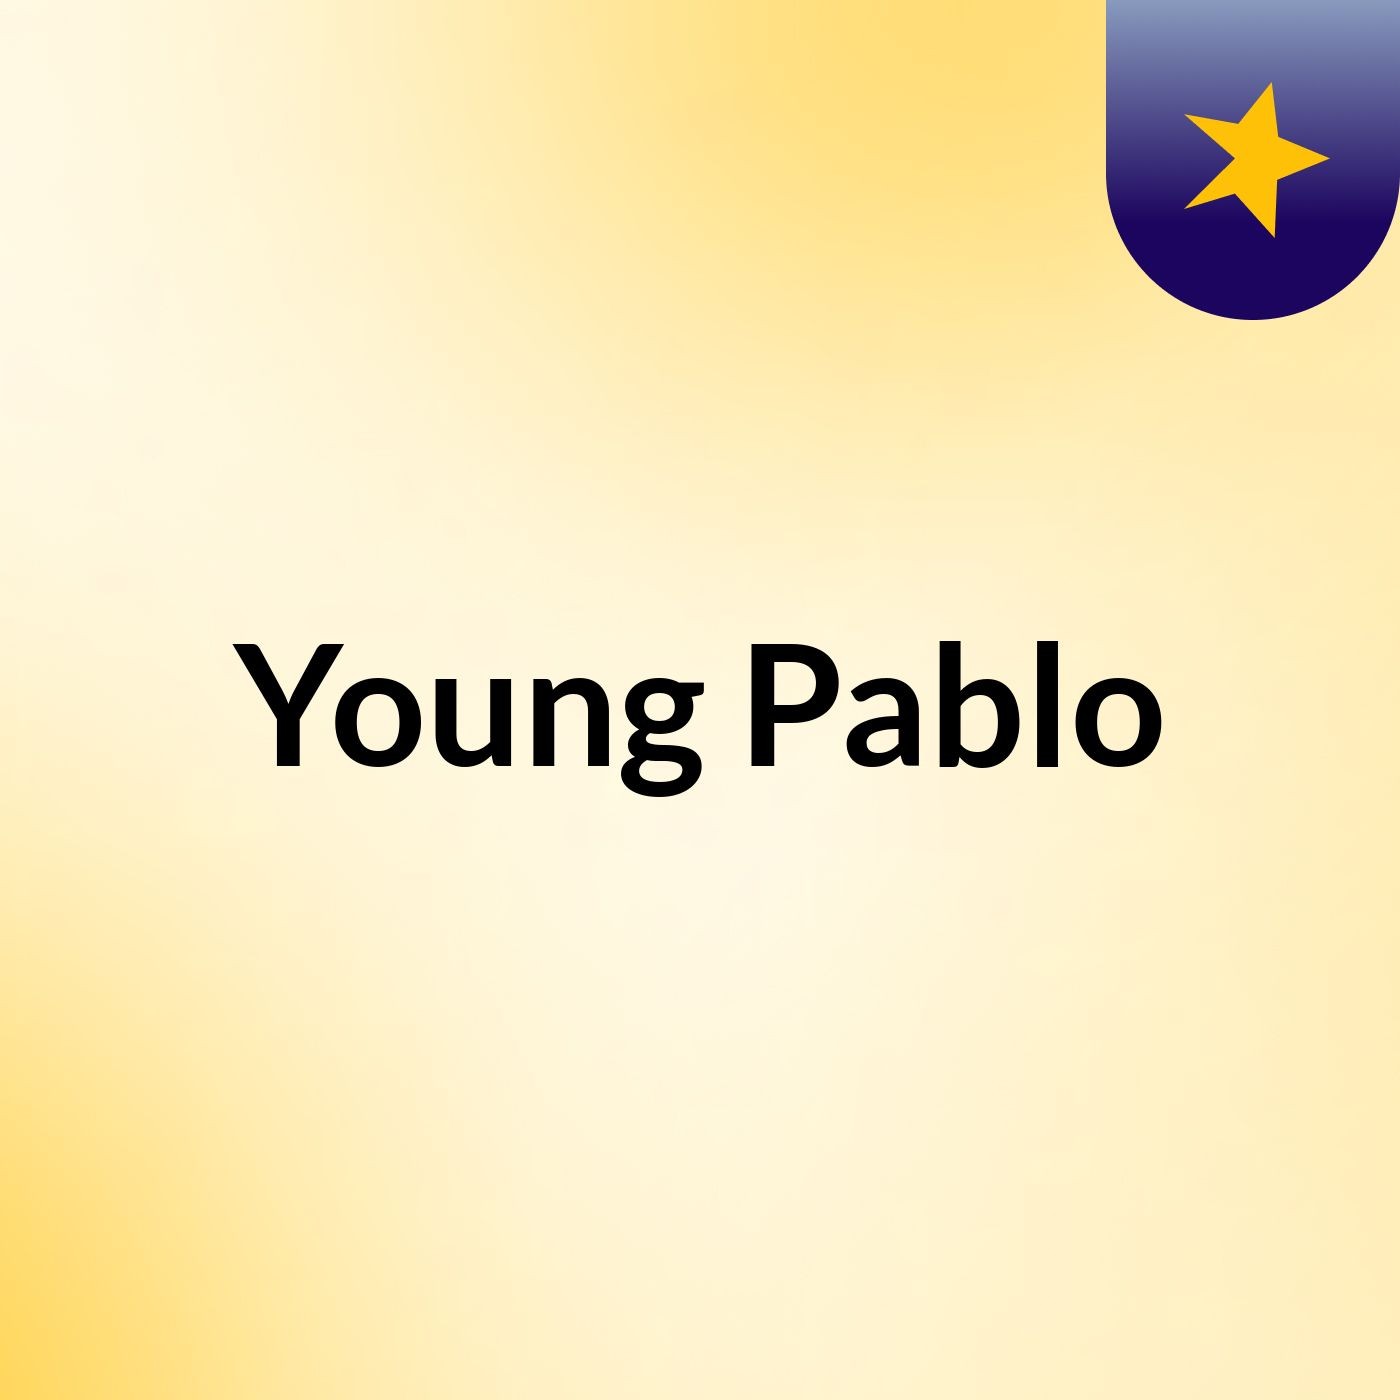 Young Pablo